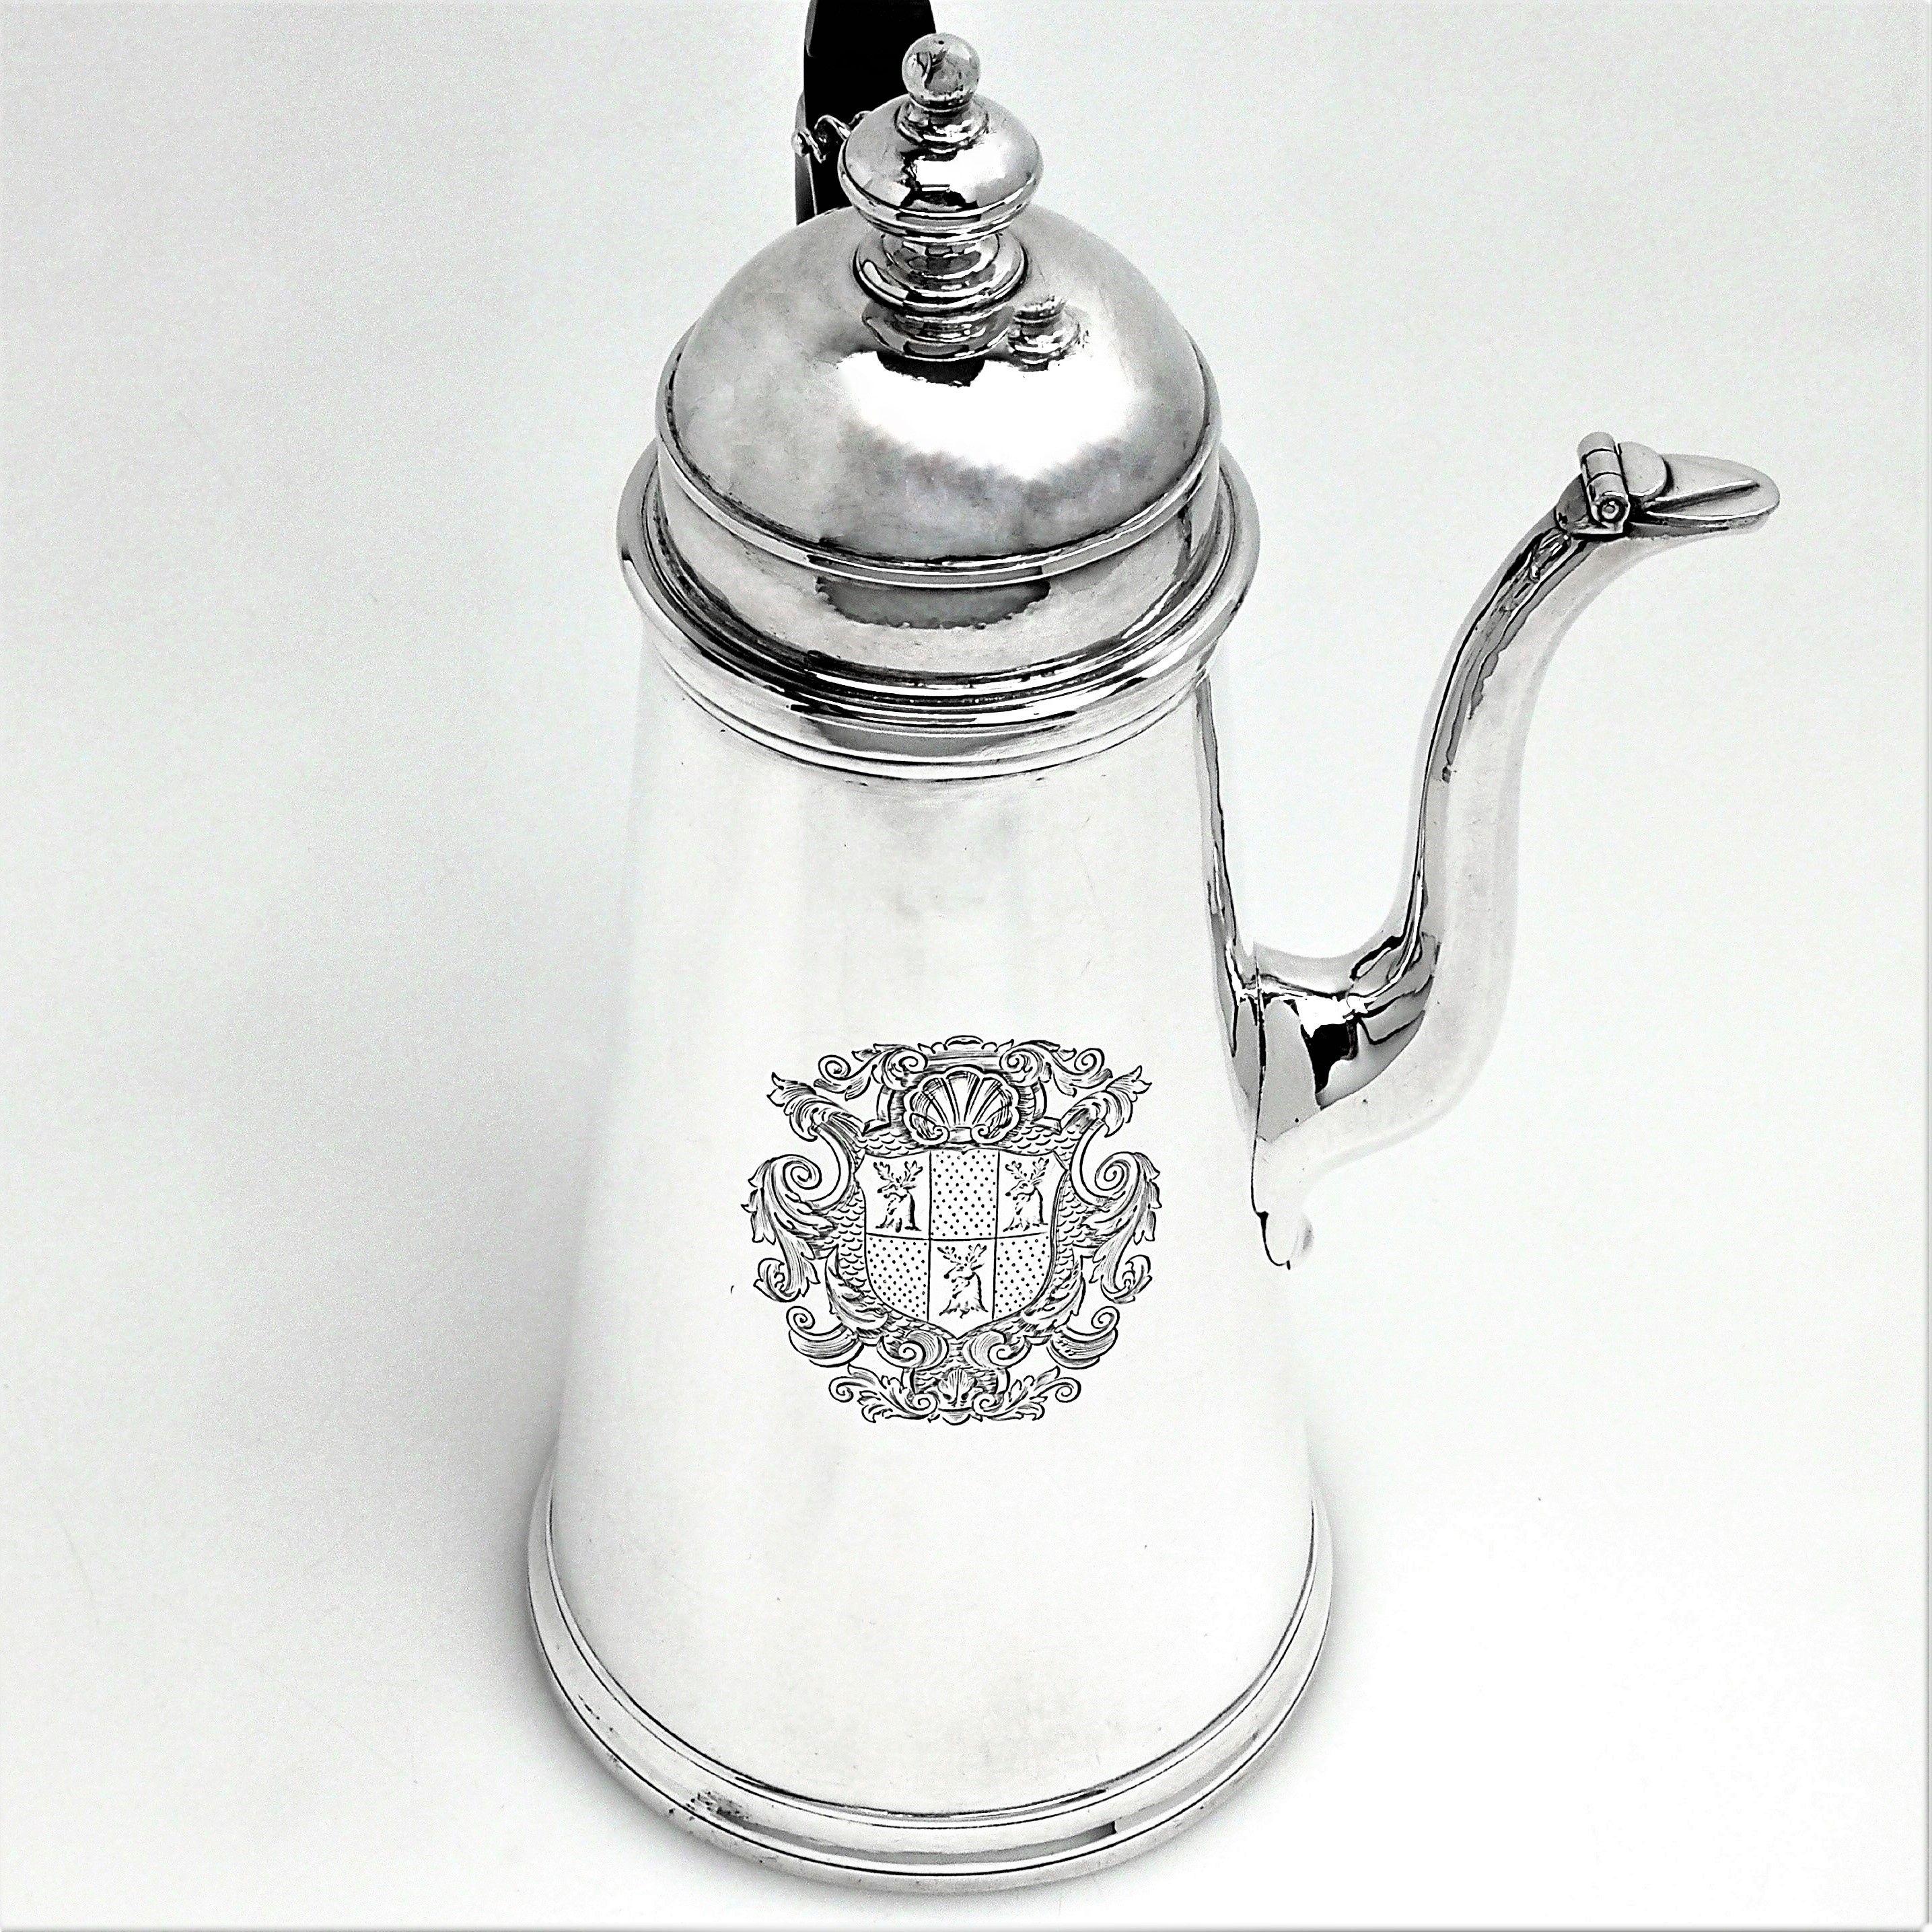 An excellent antique George I solid Silver side handled Coffee Pot with an impressive engraved armorial opposite the wooden scroll handle. The elegant tapered body of the Georgian Coffee Pot has a hinged domed lid with a round finial.
 
 Made in